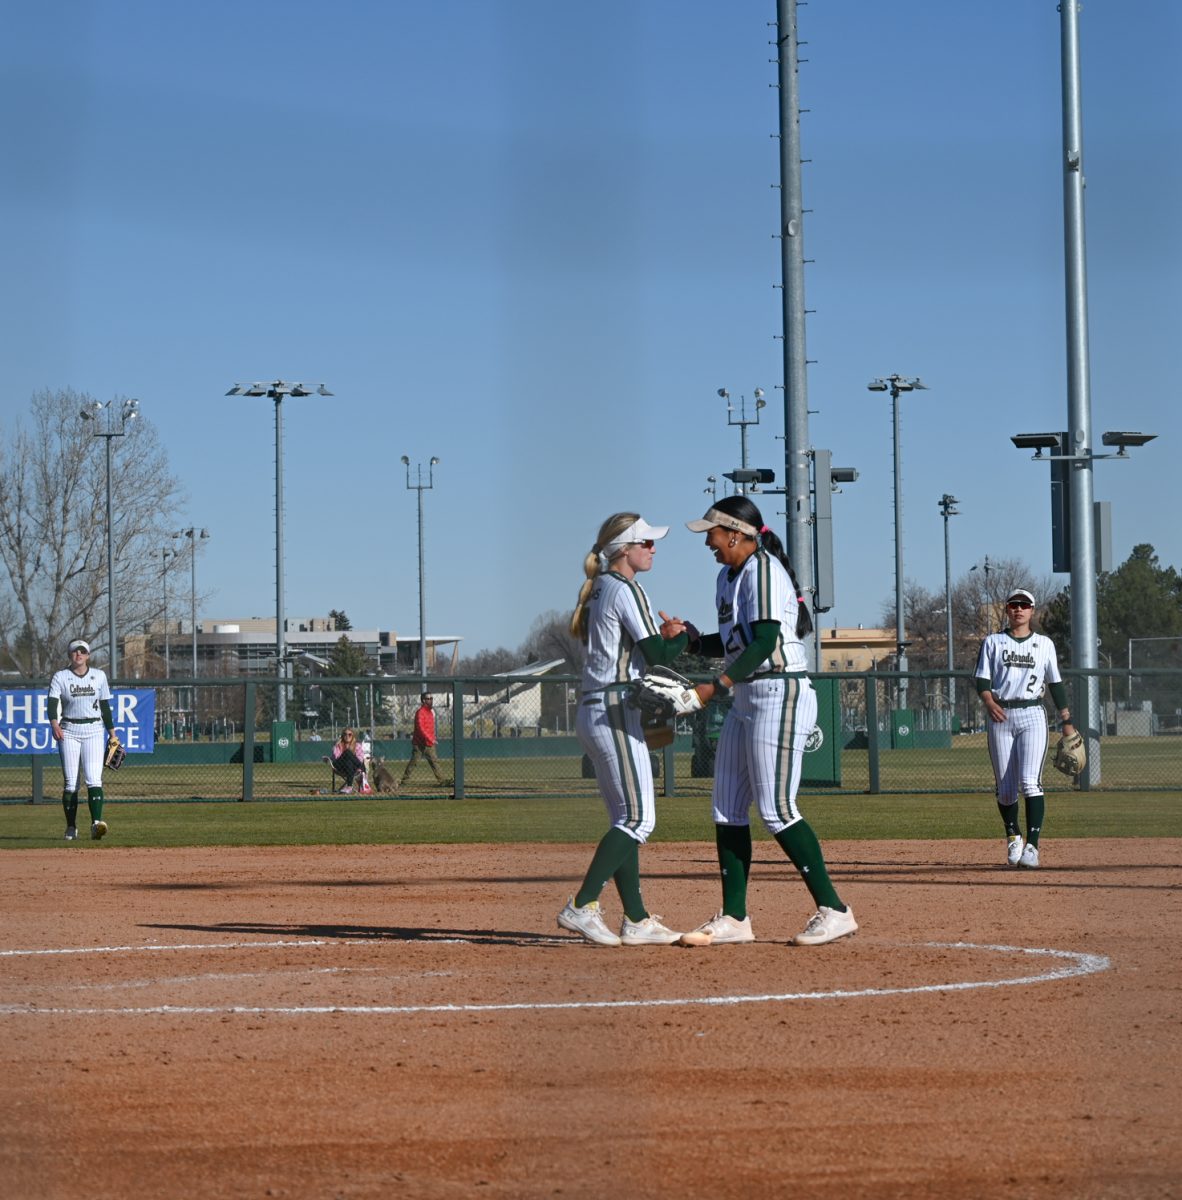 Two CSU players give each other a handshake after a well-made play during the CSU vs. University of Maine softball game on March 9. (CSU won 6-2)